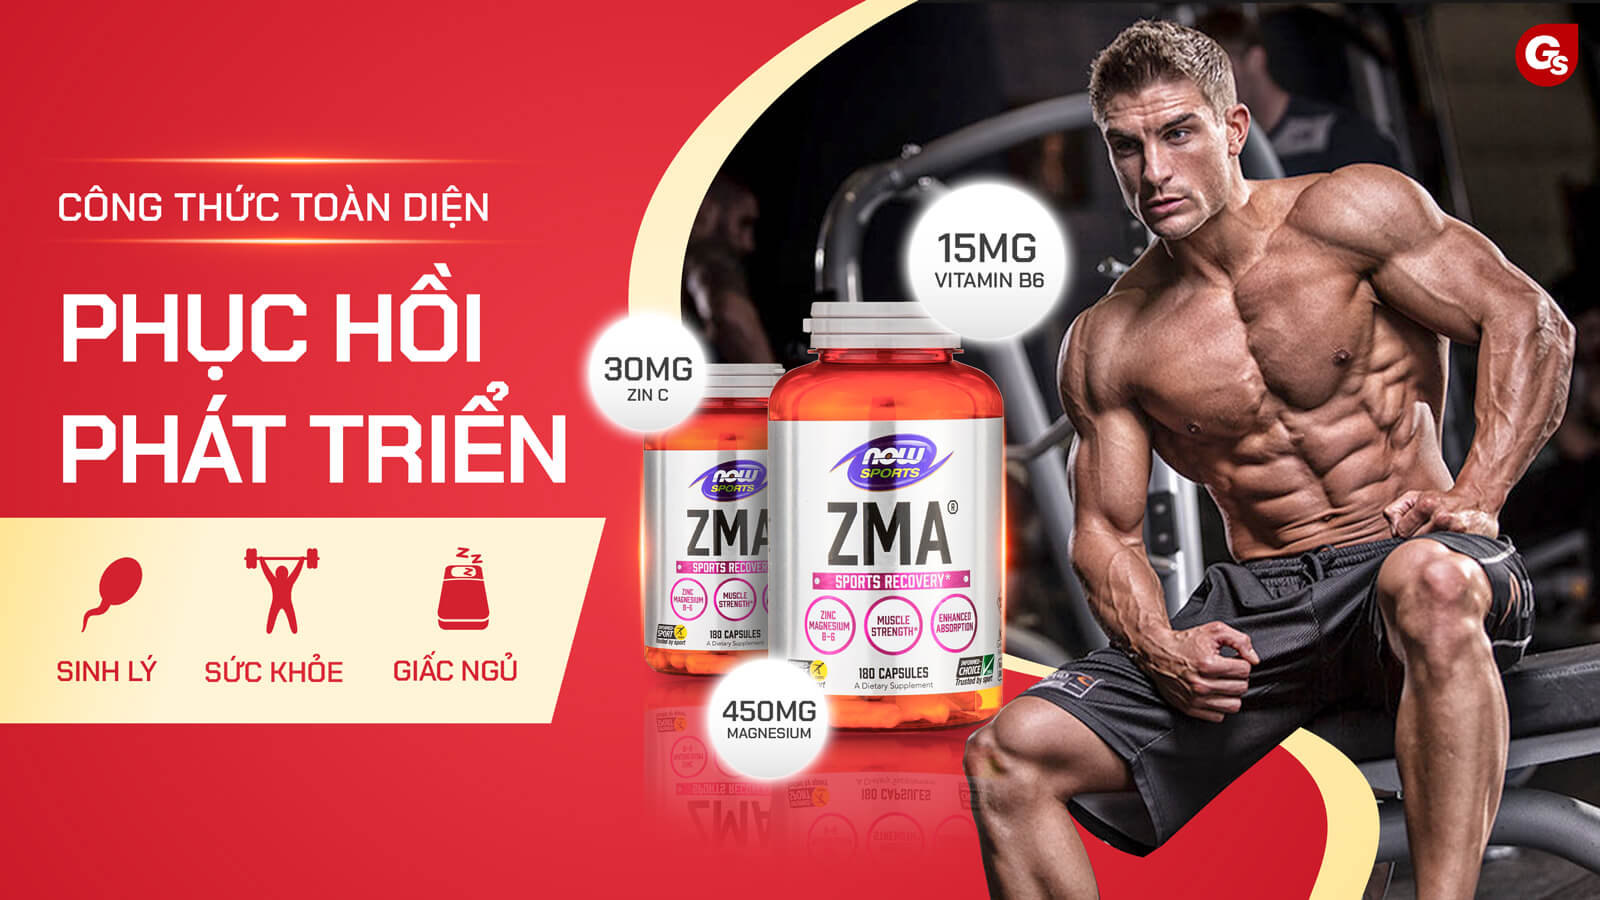 now-zma-ho-tro-sinh-ly-suc-khoe-toan-dien-gymstore